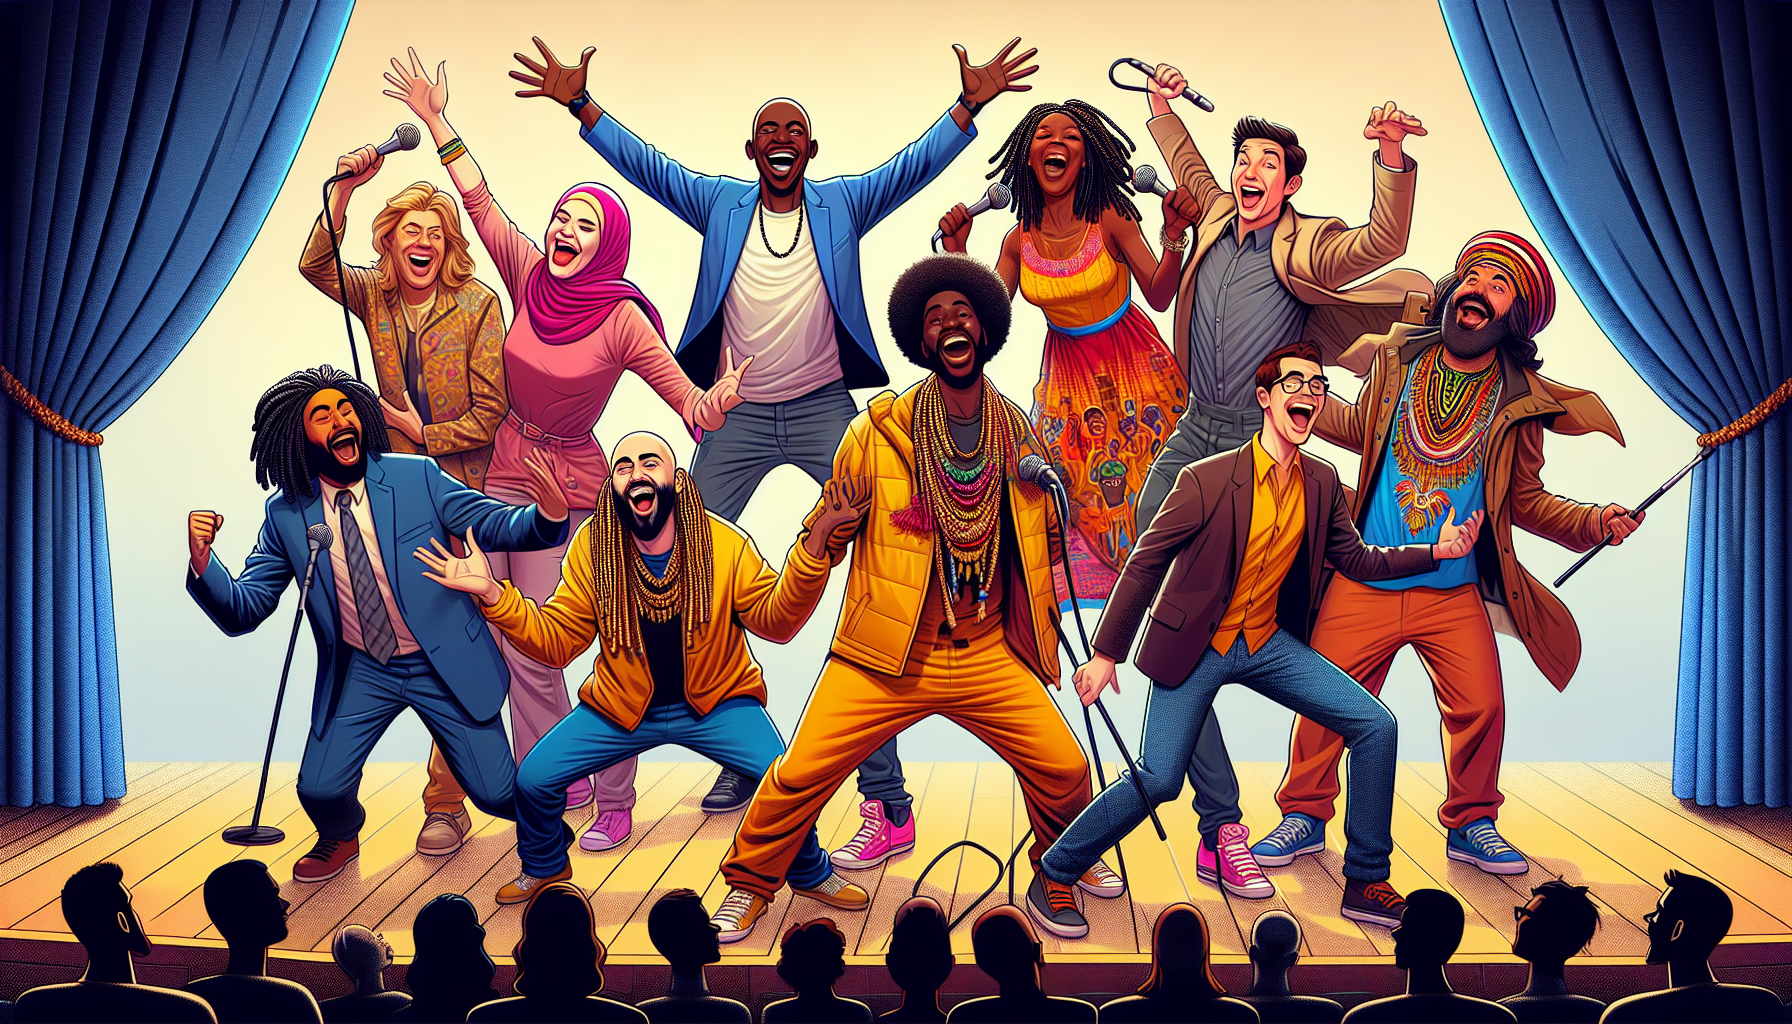 An illustration of a vibrant, multi-ethnic comedy ensemble on a theatre stage, each actor animatedly portraying a distinct and dynamic character, interacting with playful expressions and diverse perso